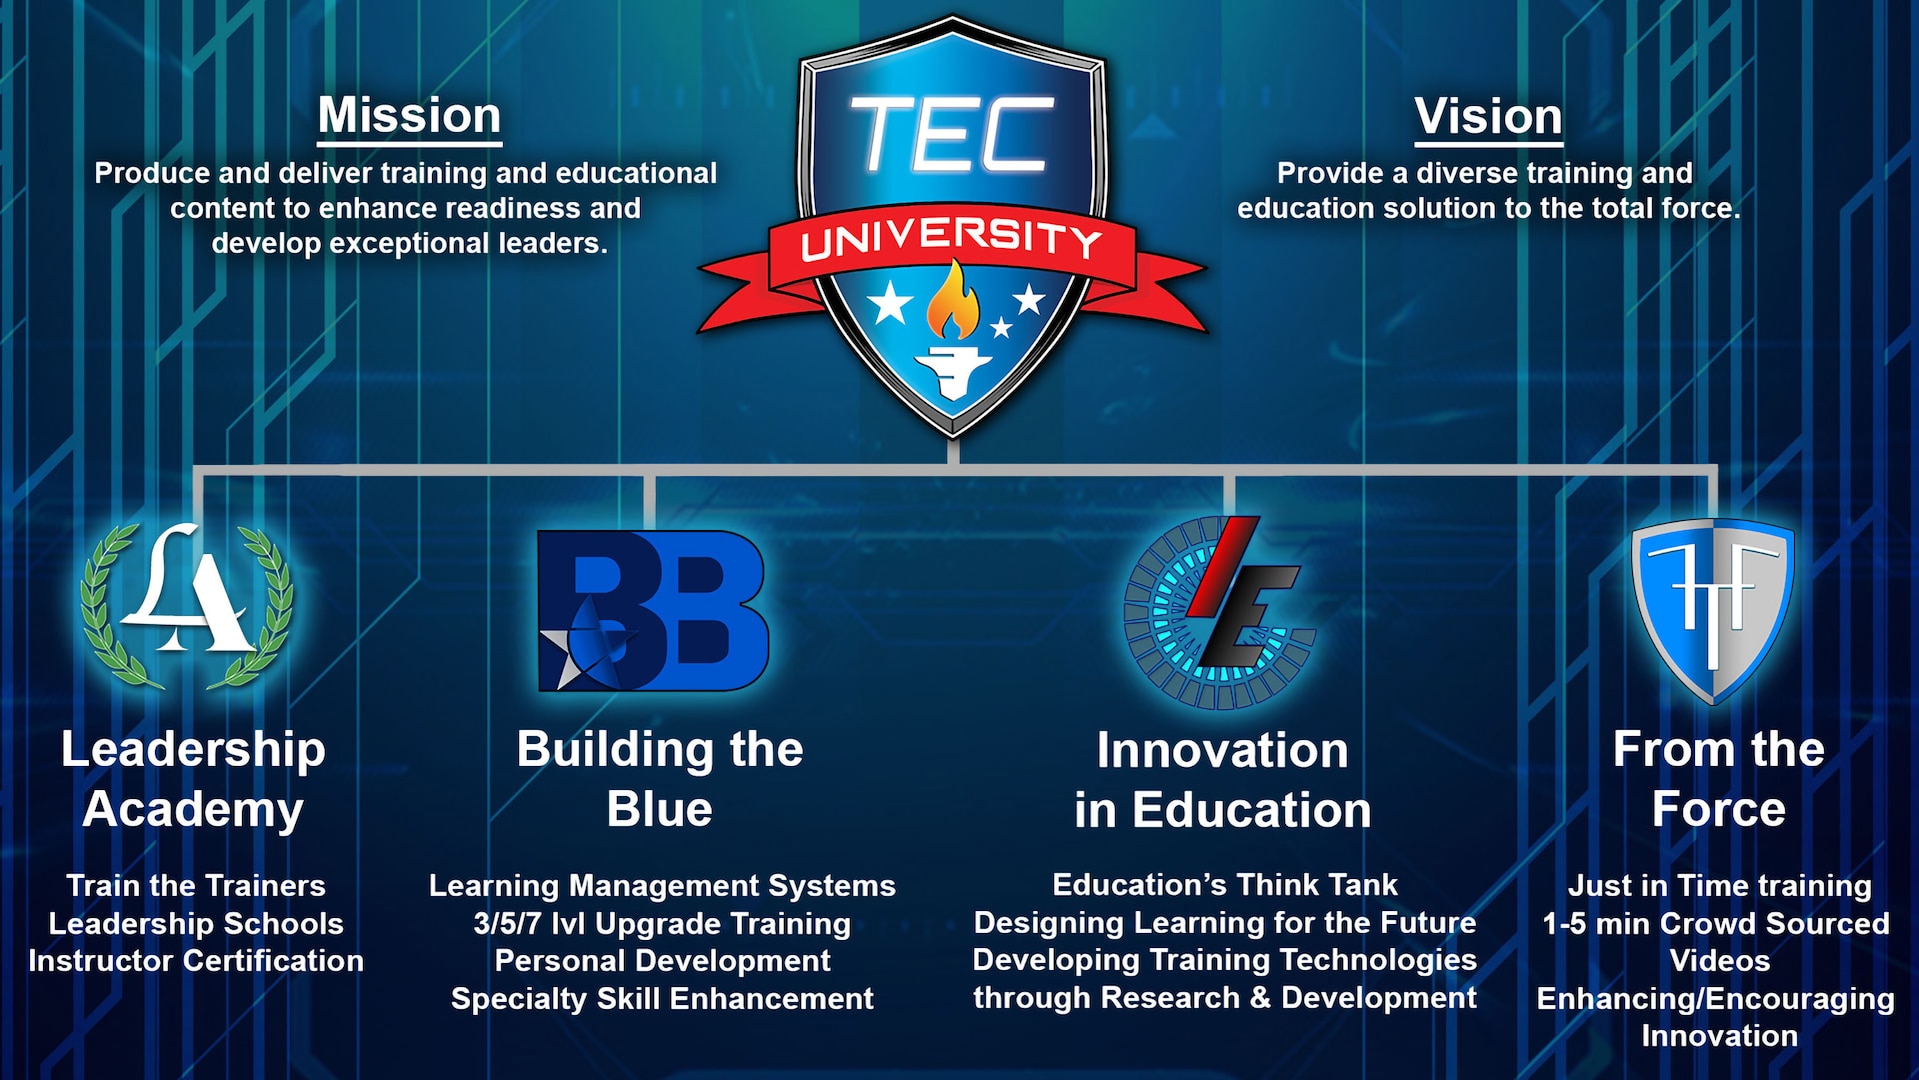 TEC University, which provides continuing education for Airmen, is changing its name as it evolves its technology and methods to teach where students live.